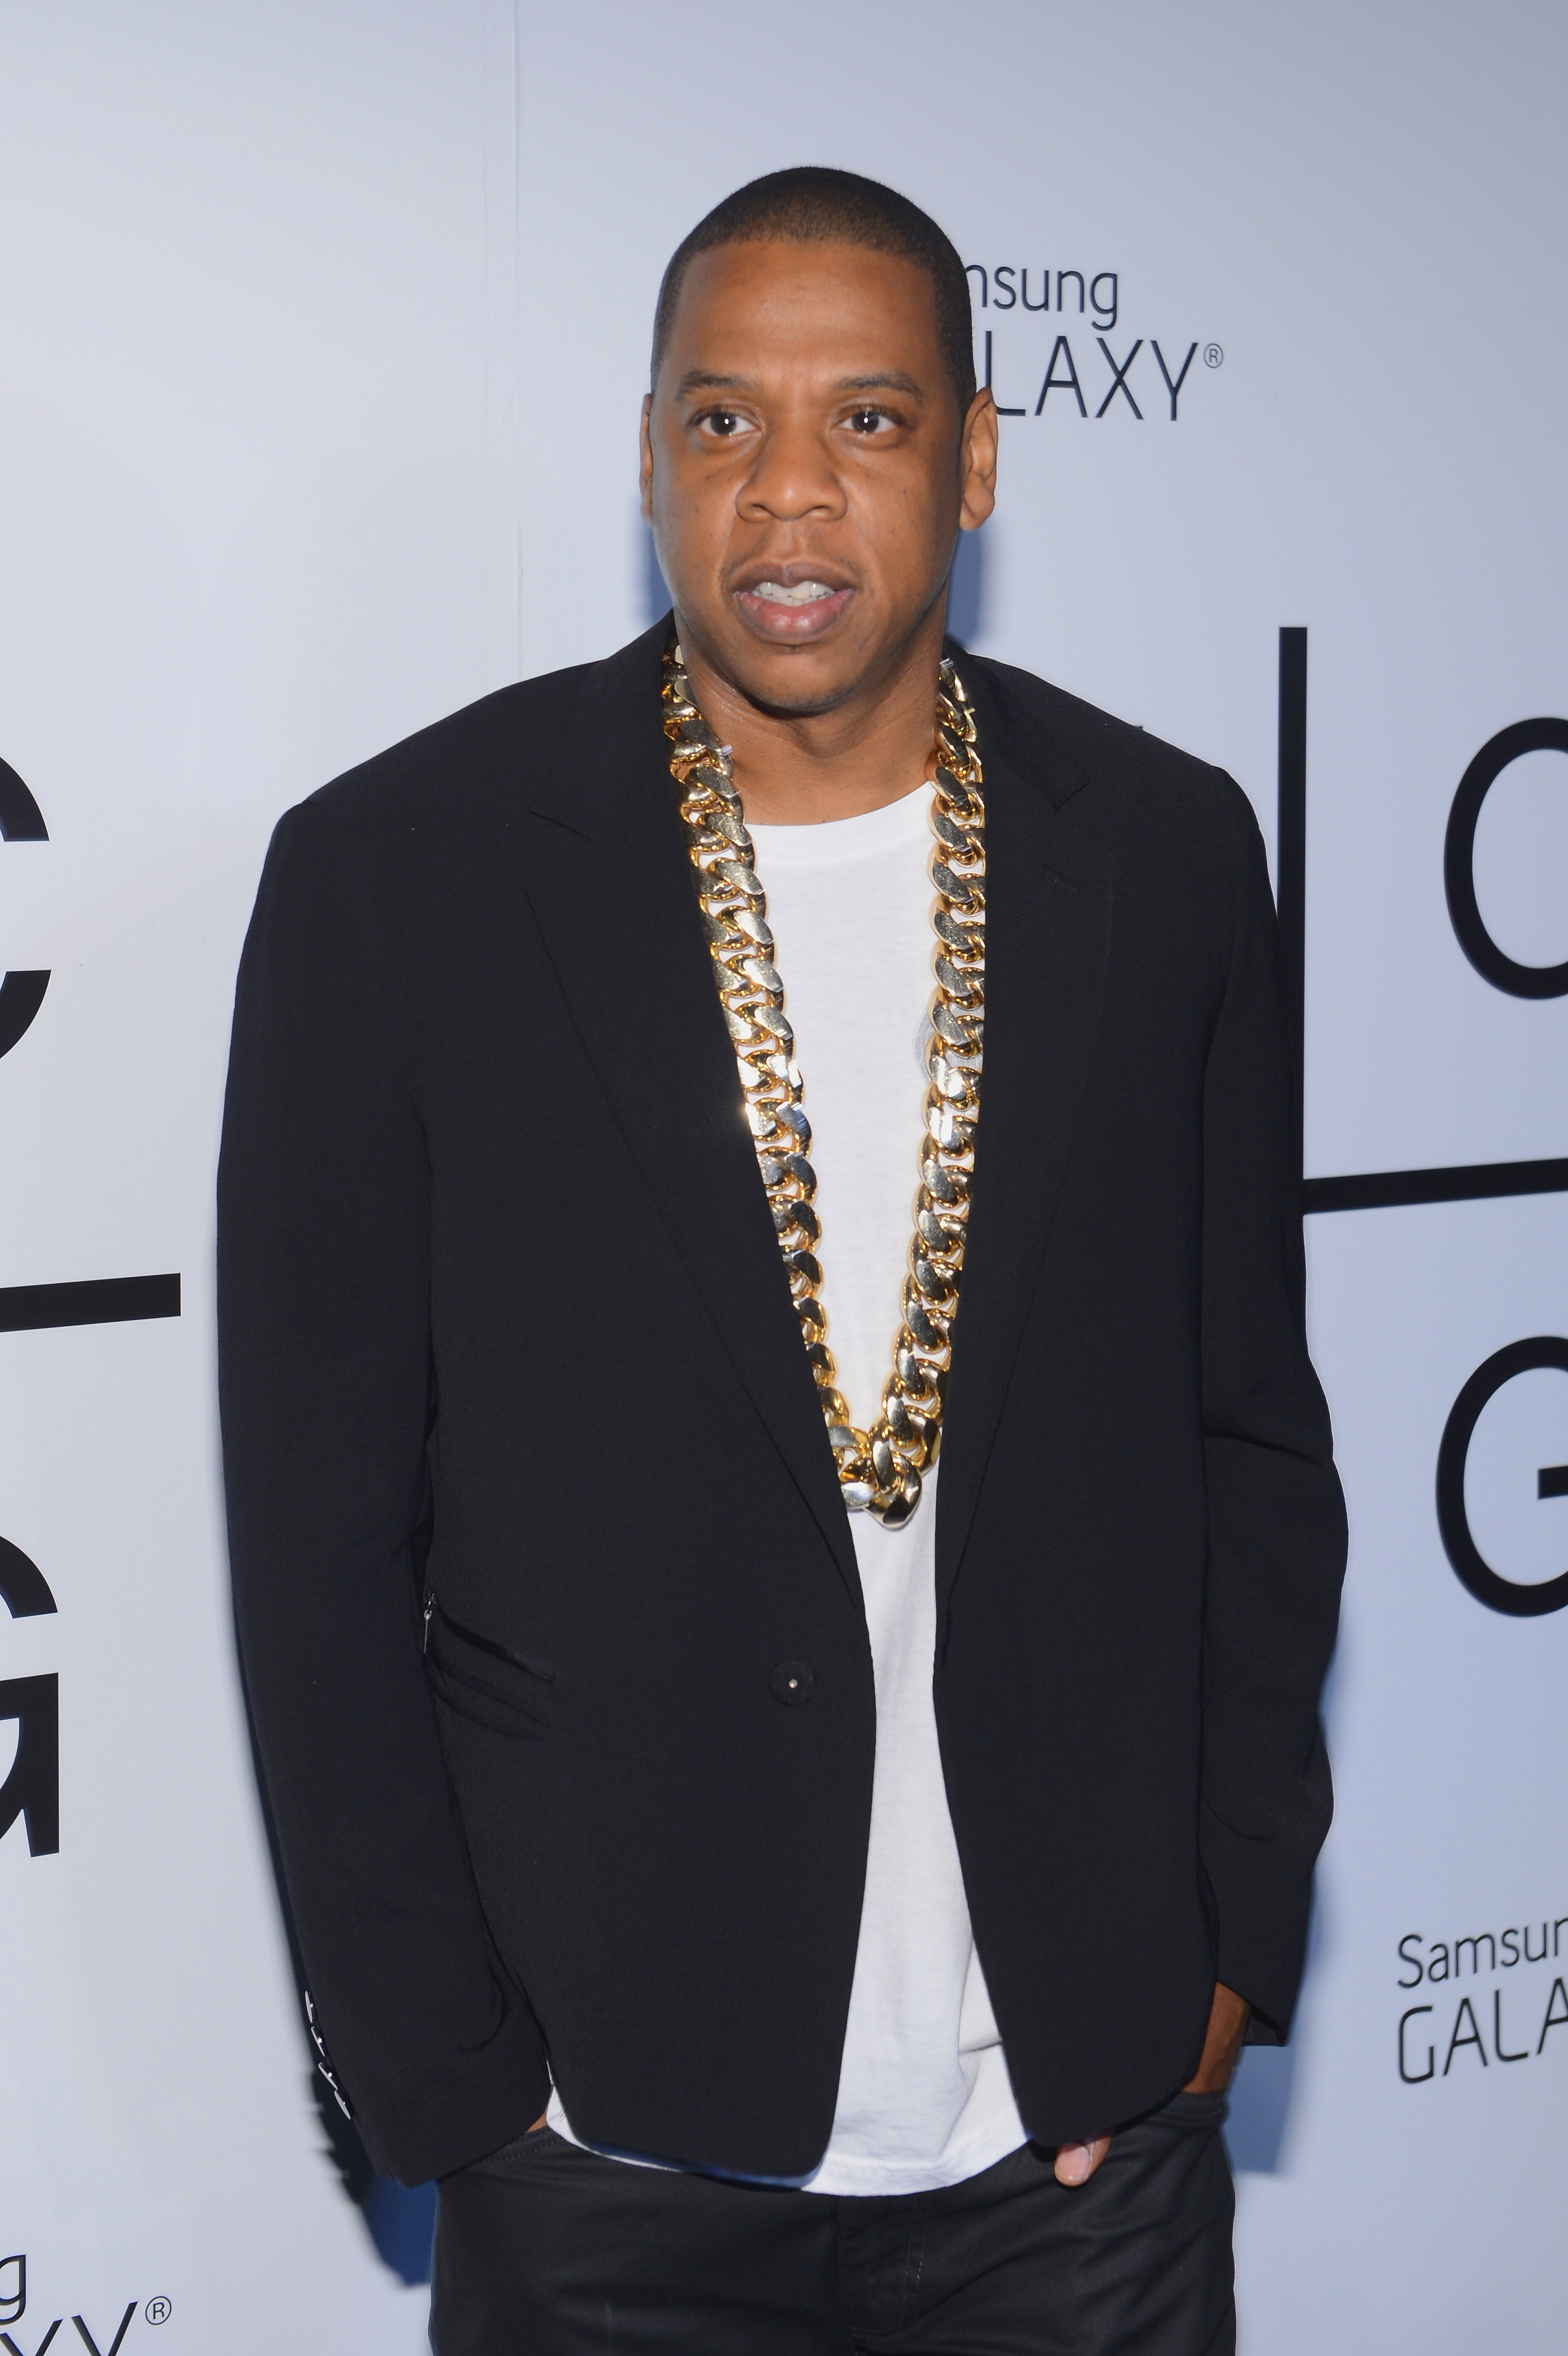 EXCLUSIVE: Jay Z splits from longtime business partner John Meneilly, who  helped make Roc Nation and Rocawear successful – New York Daily News